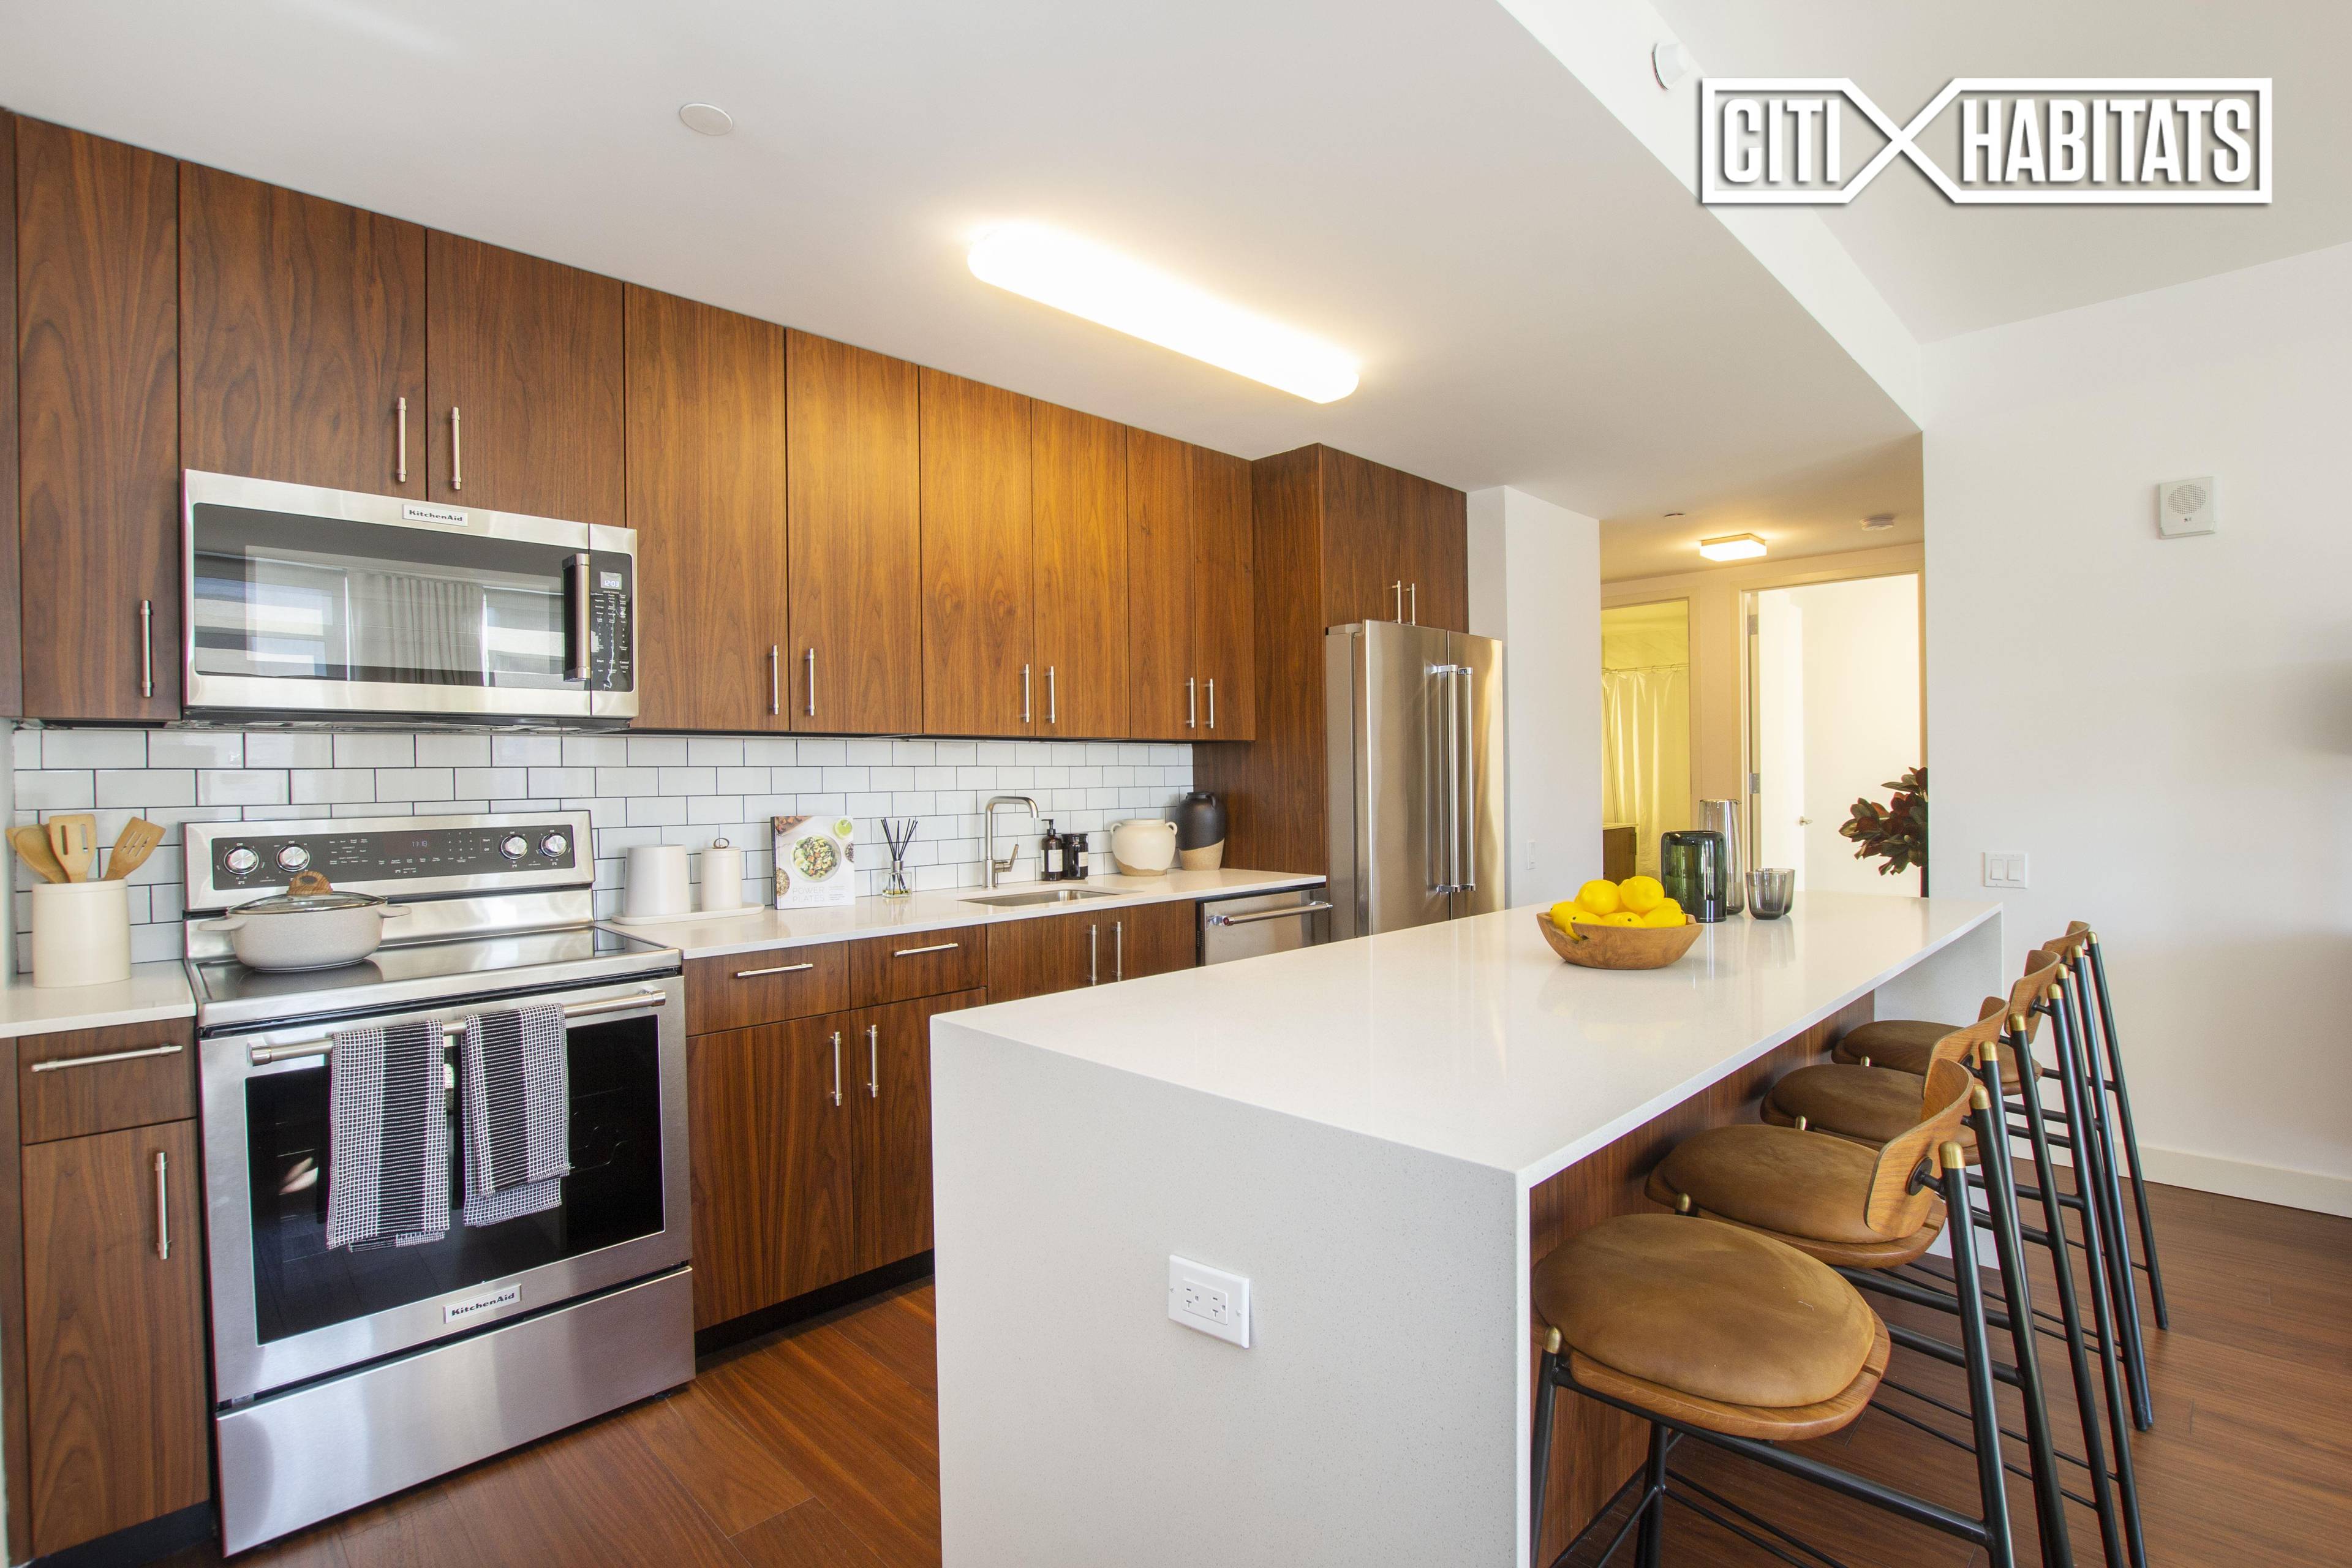 Net effective rent advertised 2 Months Free on 12 Month Lease This Sun Drenched South facing One Bedroom residence has endless views over Brooklyn, an island kitchen for entertaining amp ...